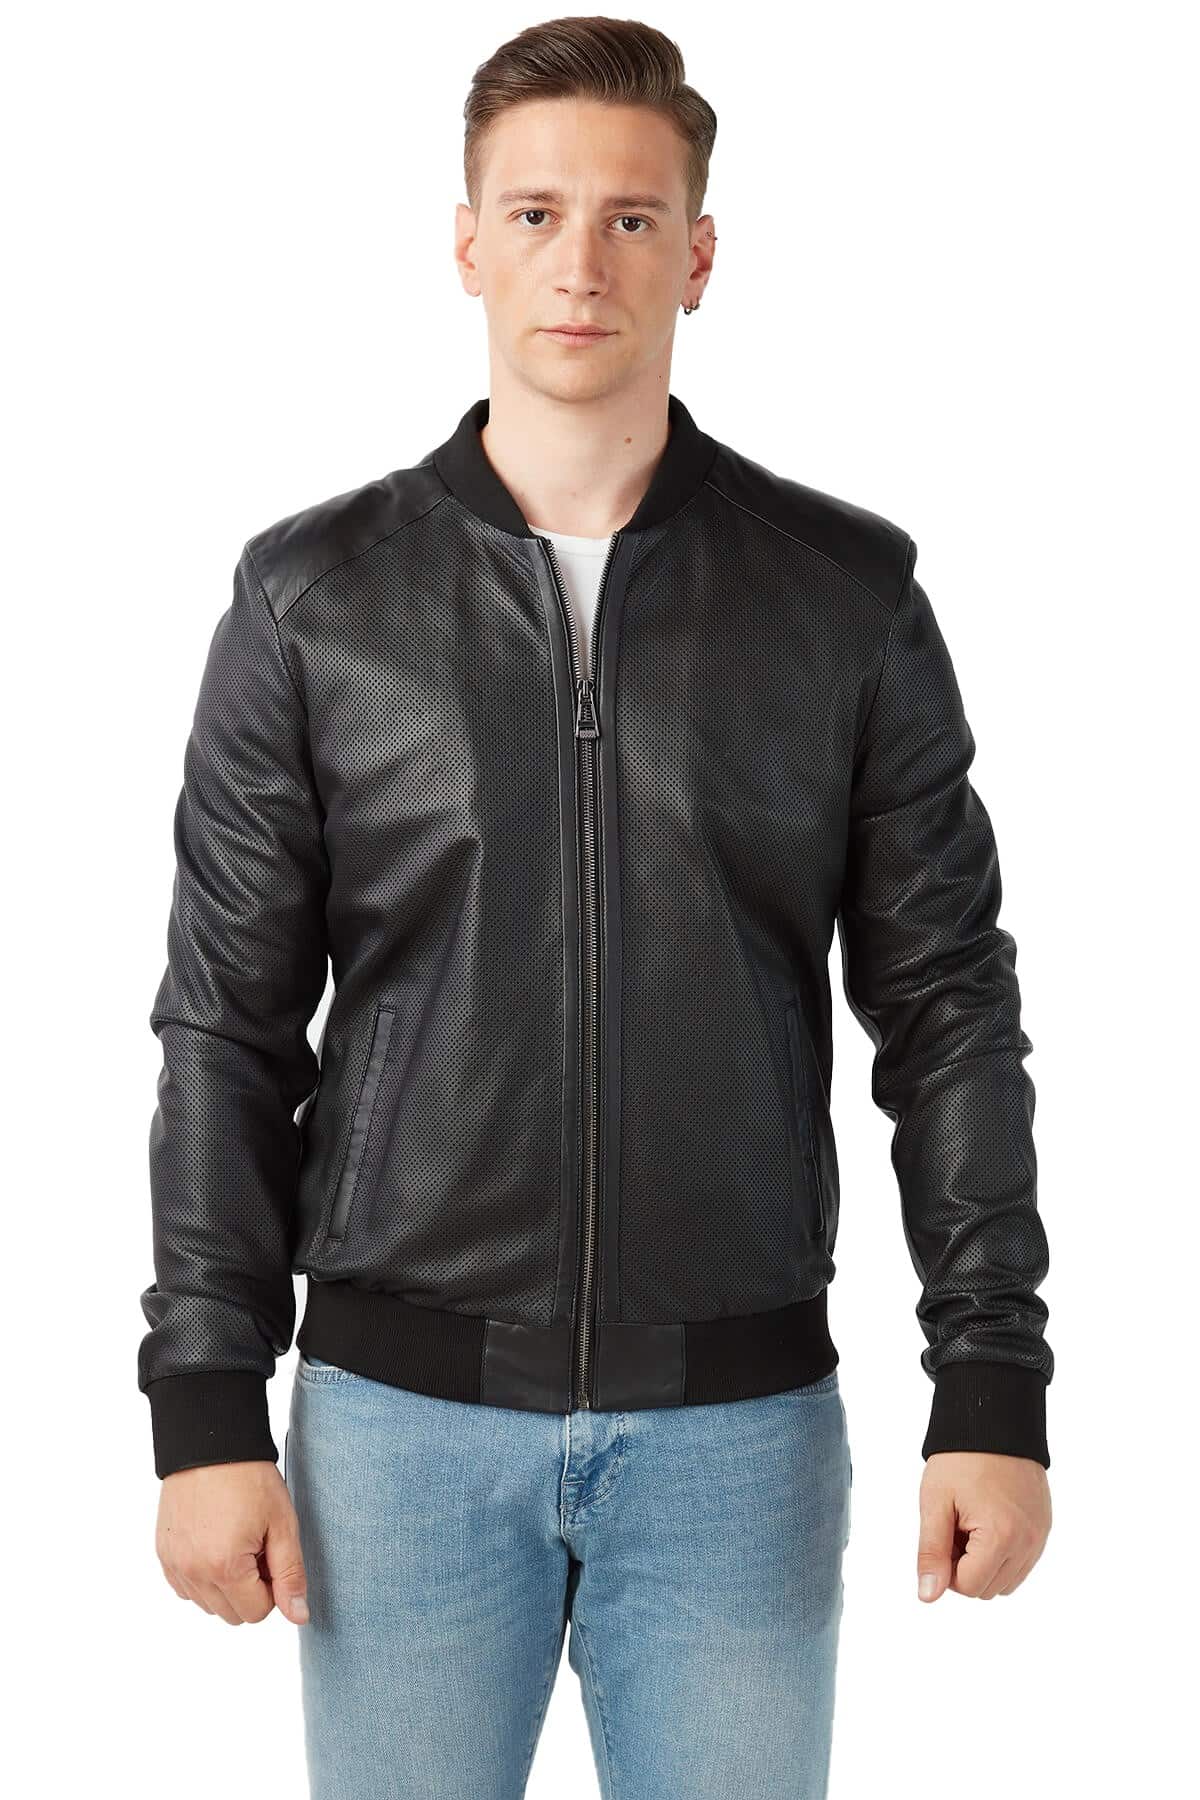 Men's 100 % Real Black Leather Perforated College Style Jacket